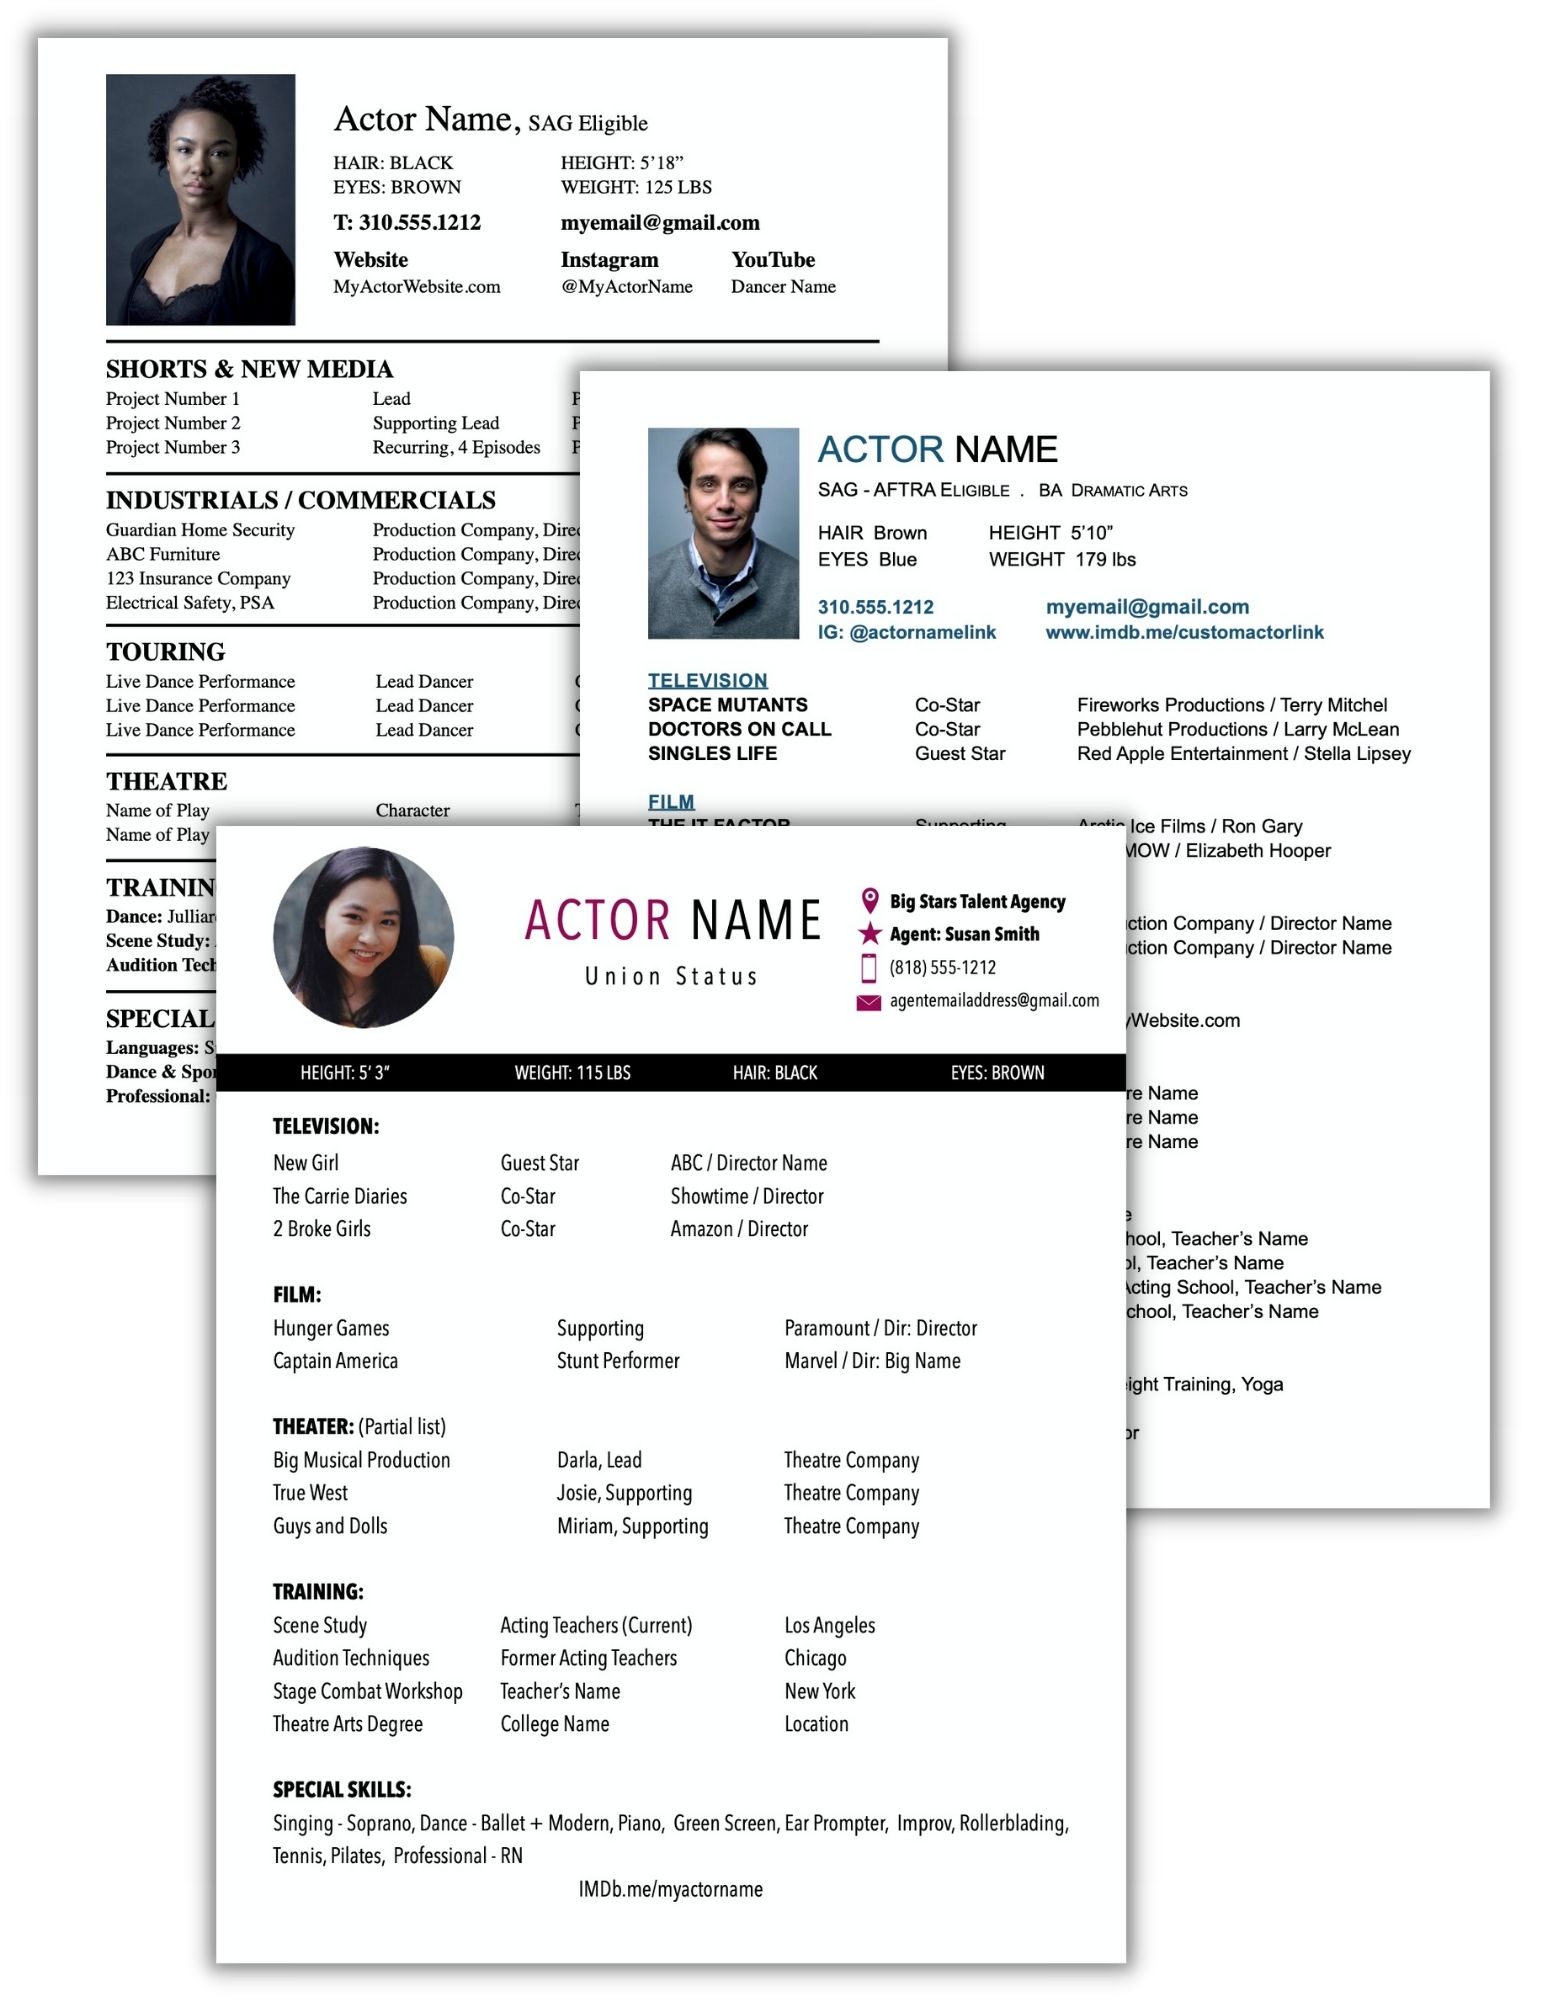 Actor resume templates. Resumes for professional actors.